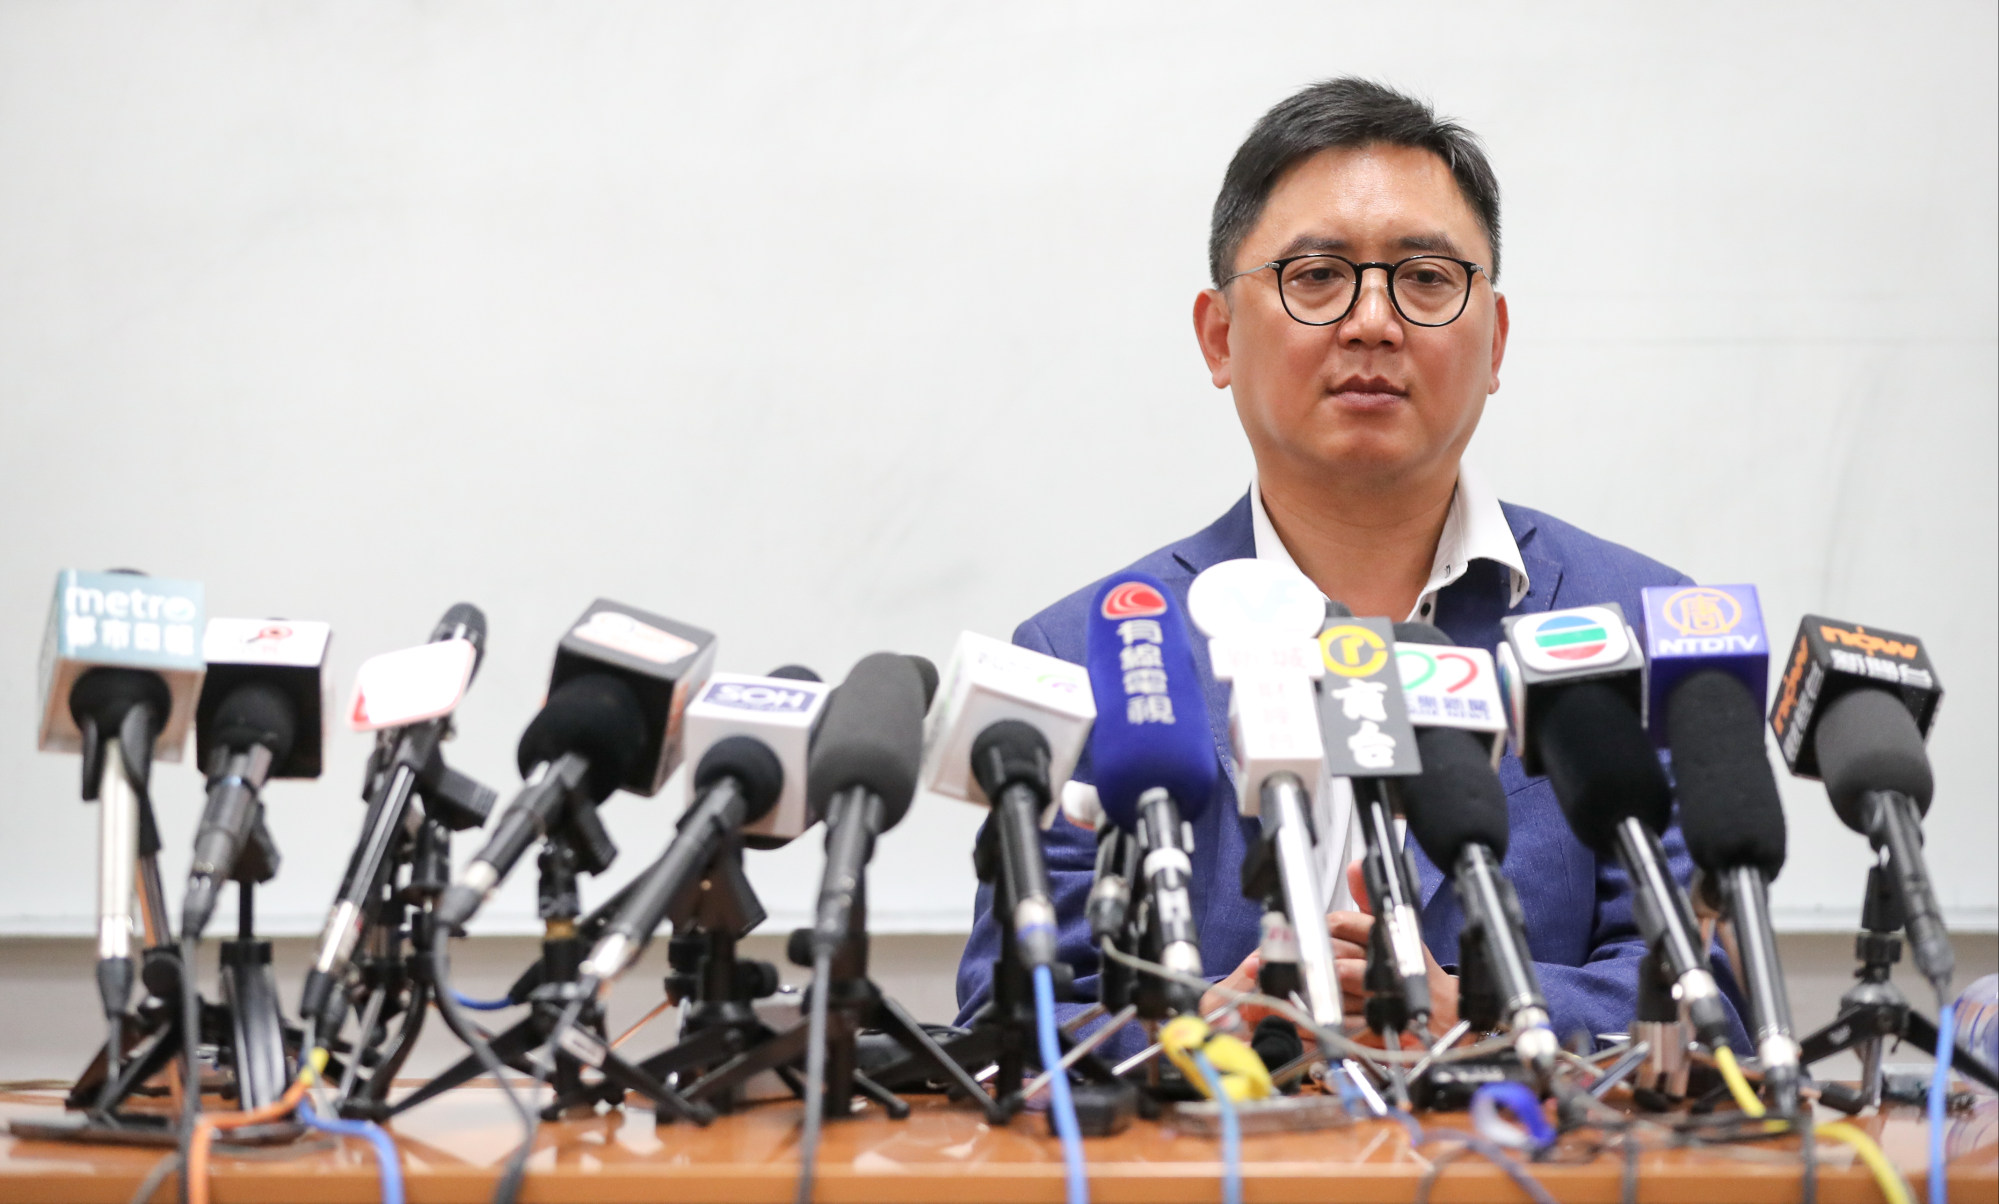 Hong Kong’s leader says community work must come first among district ...